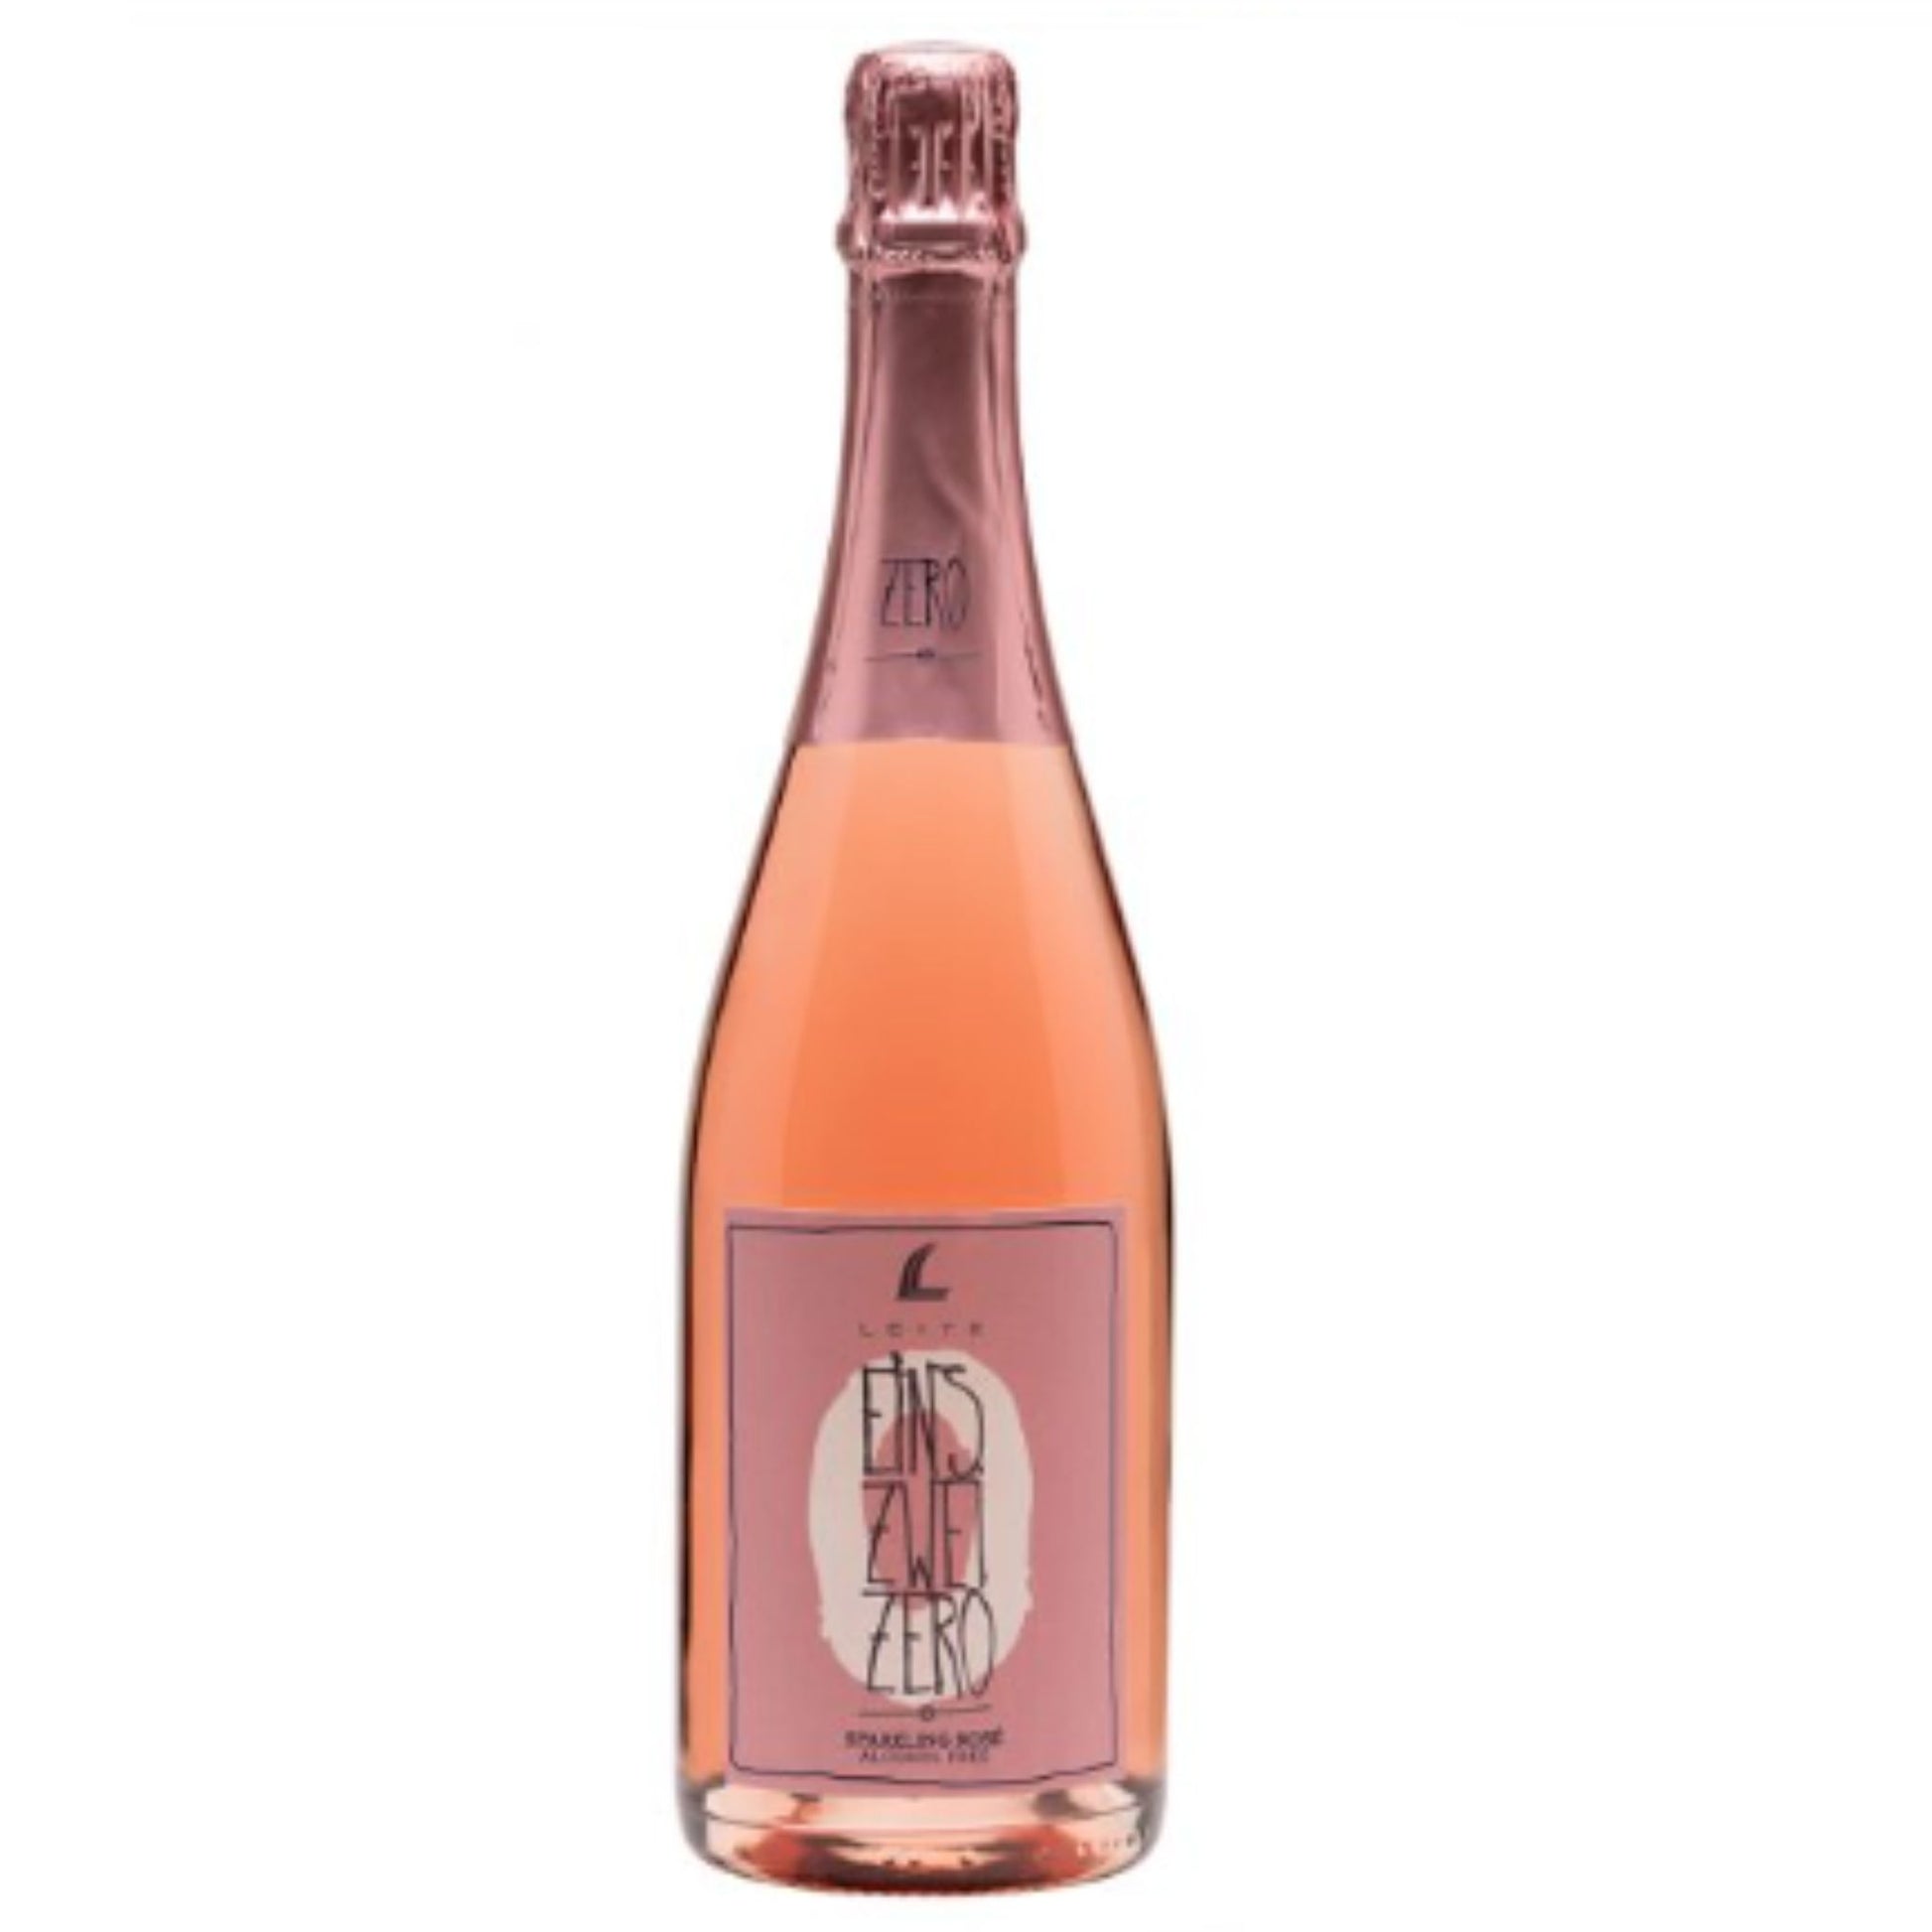 Leitz Eins-Zwei-Zero Sparkling Rosé is available for sale at Knyota Drinks.